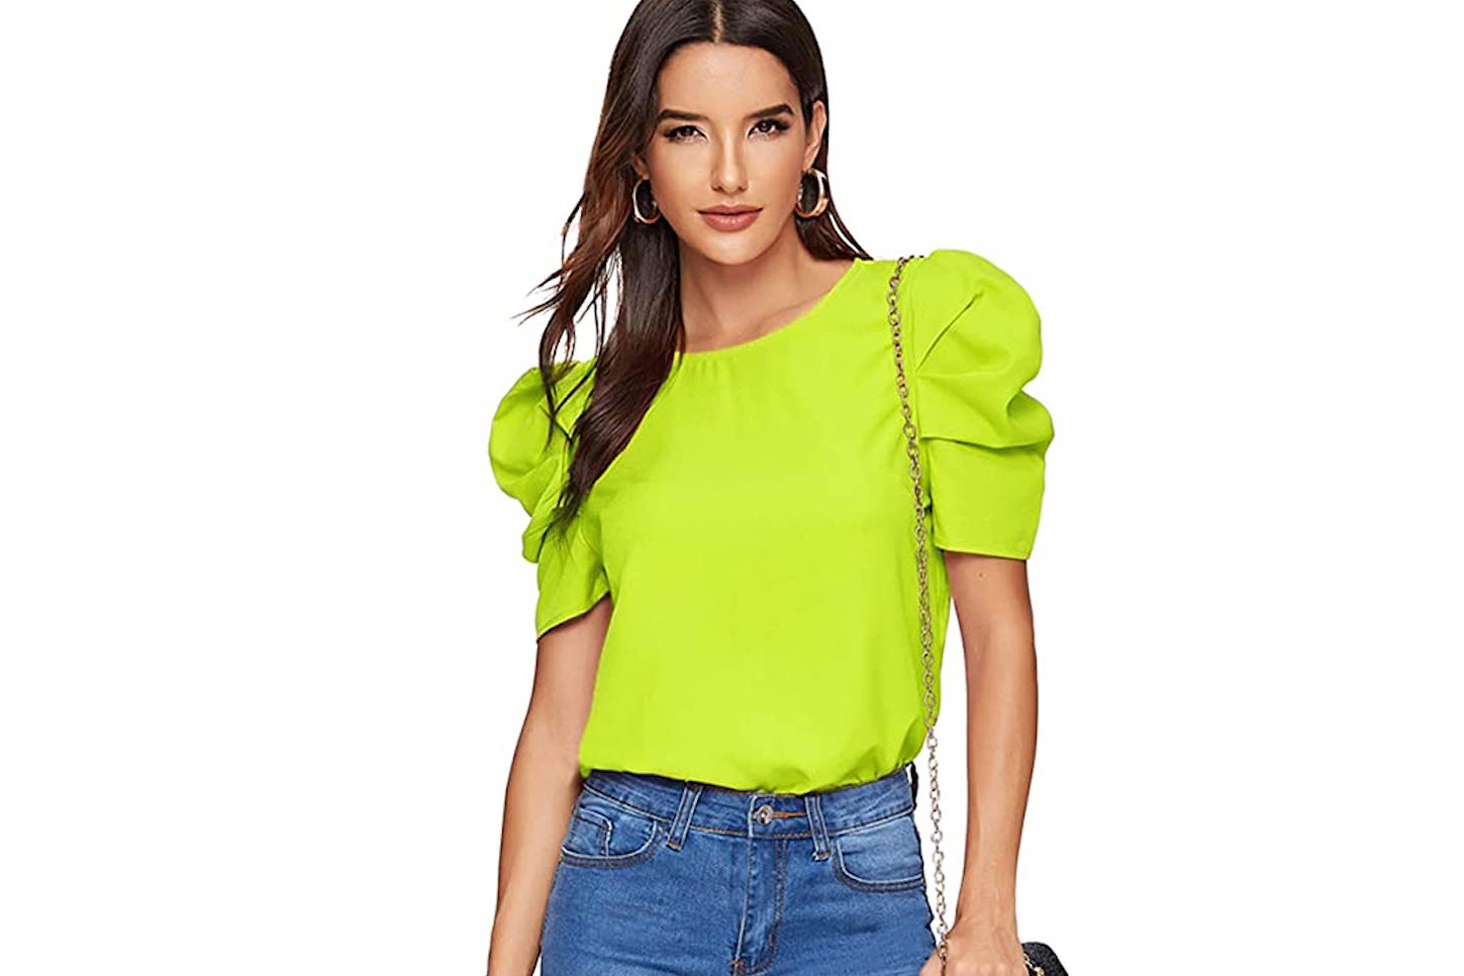 These Neon Clothes Will Lift Your Spirits All Winter Long